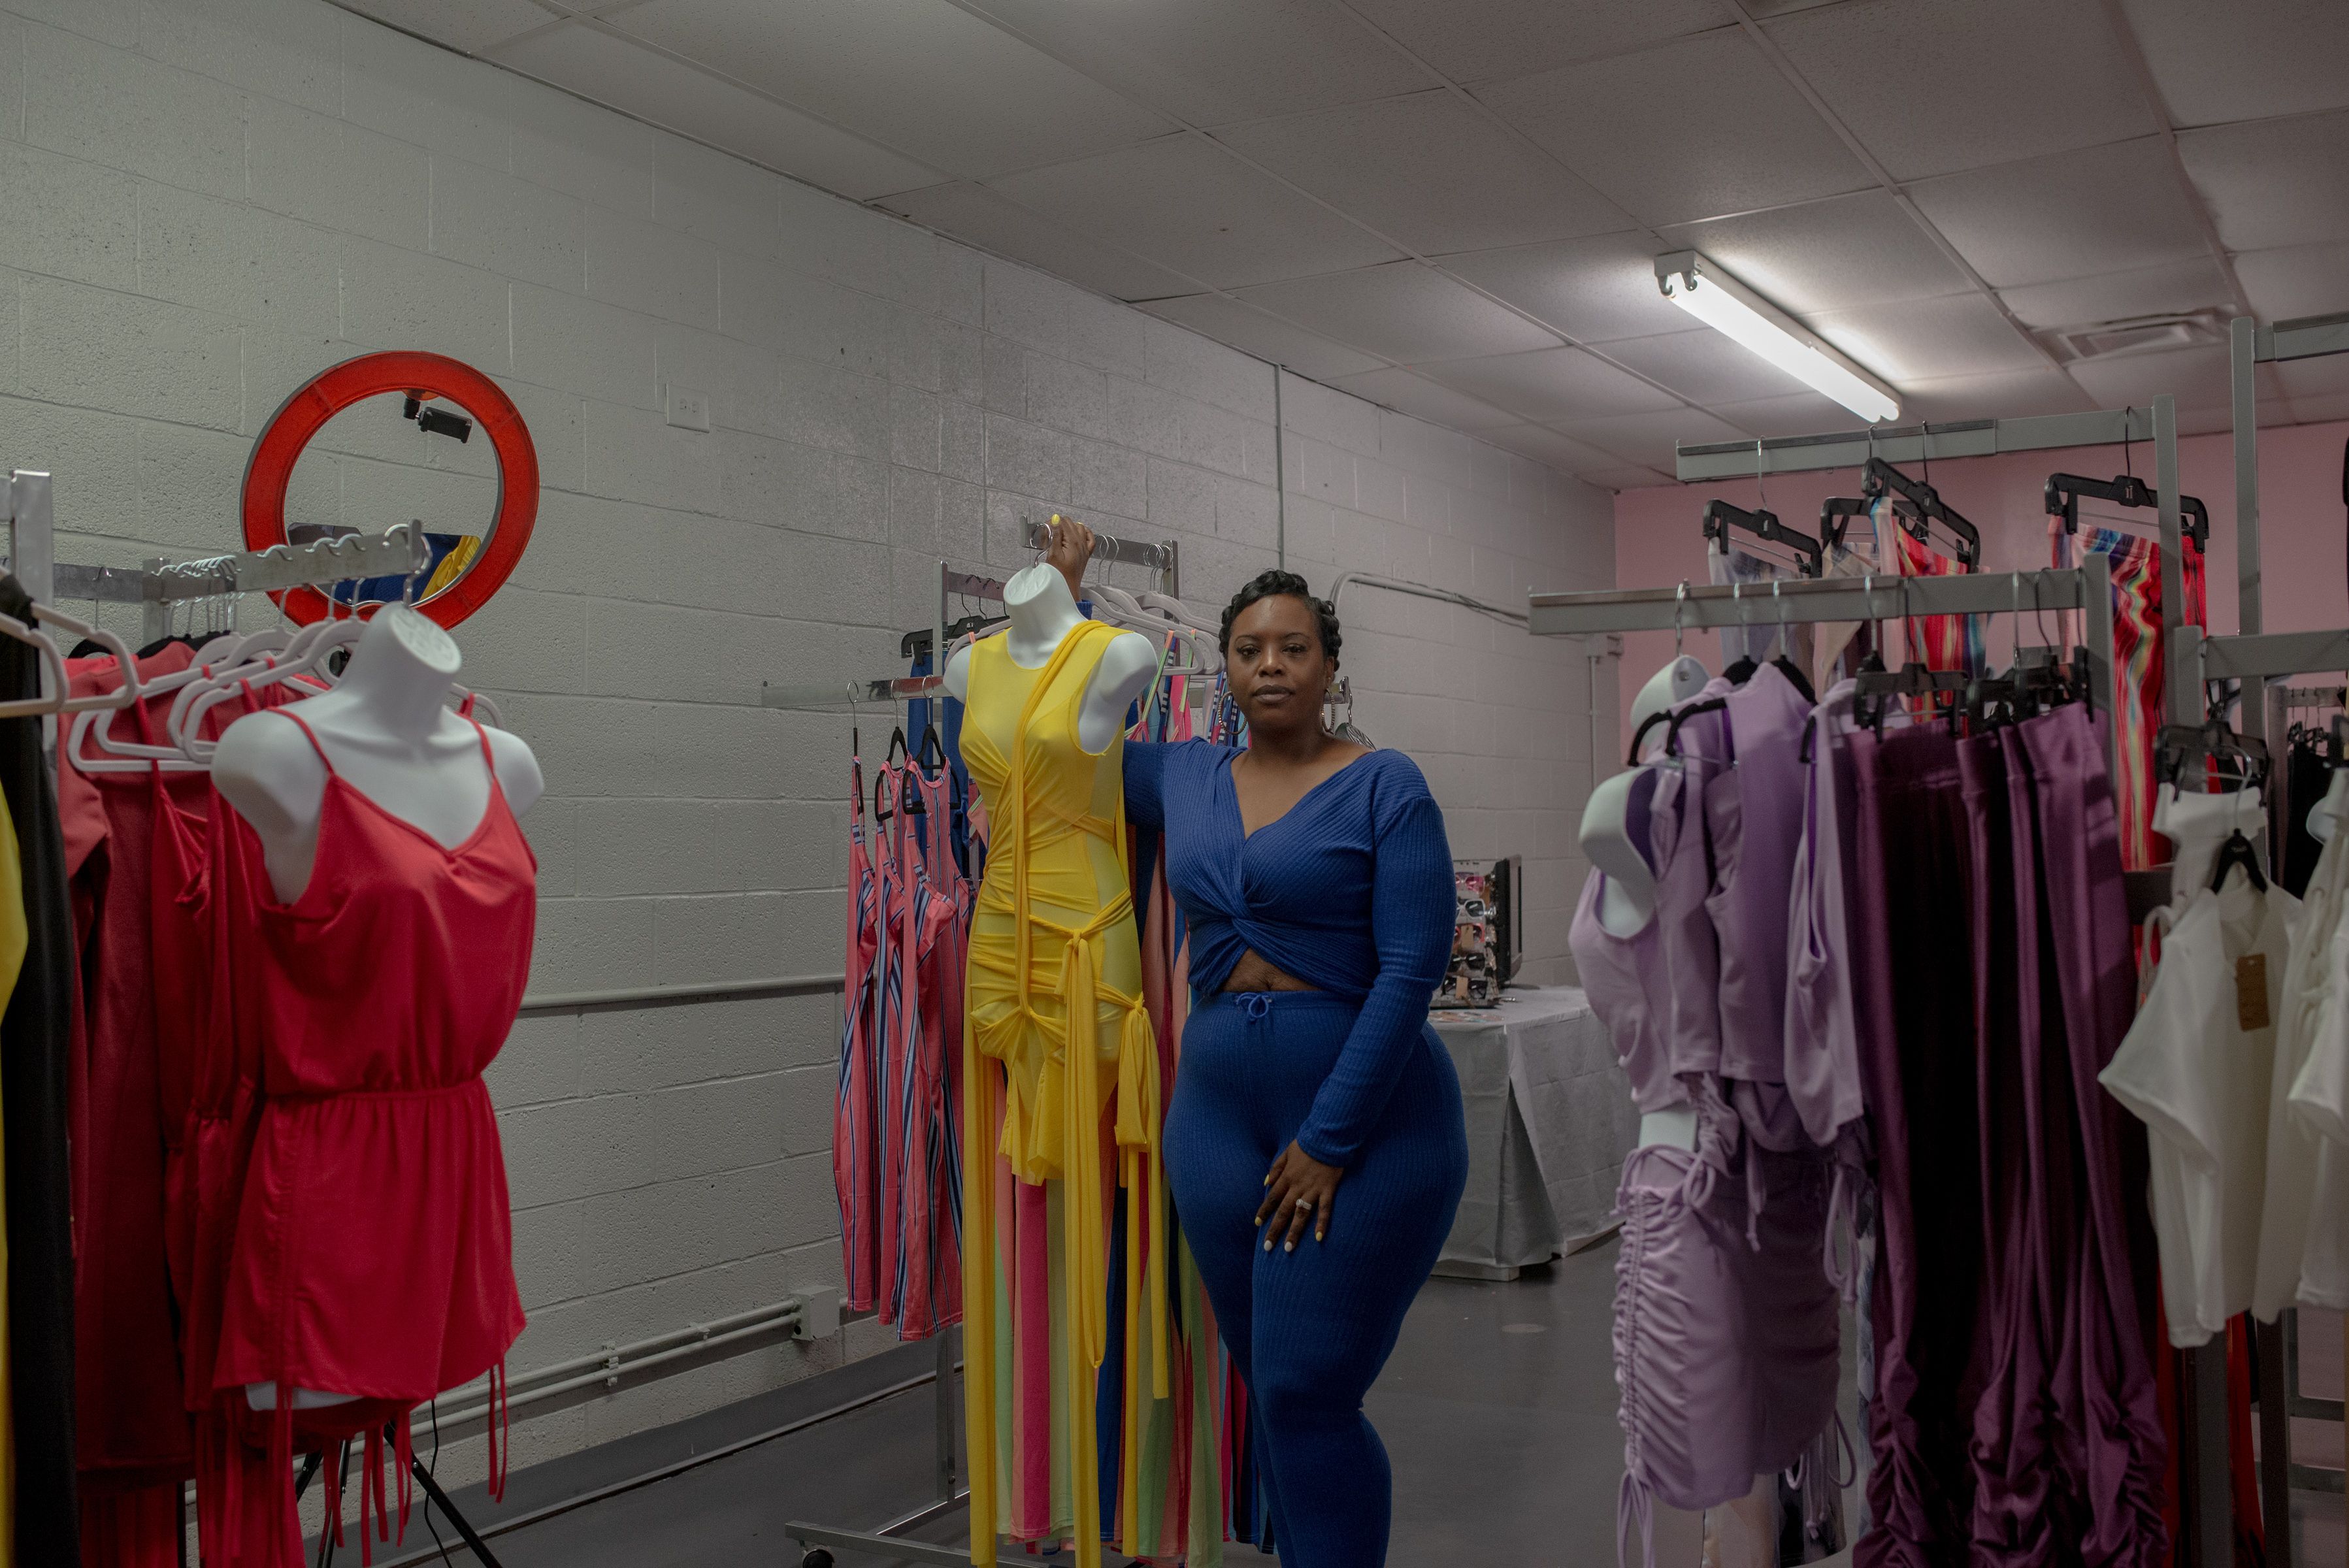 Cawanna DeLouiser opened her shop, Snaggz Boutique, in the Gibbs Shopping Center to show others the opportunity North Tulsa holds for the Black community.